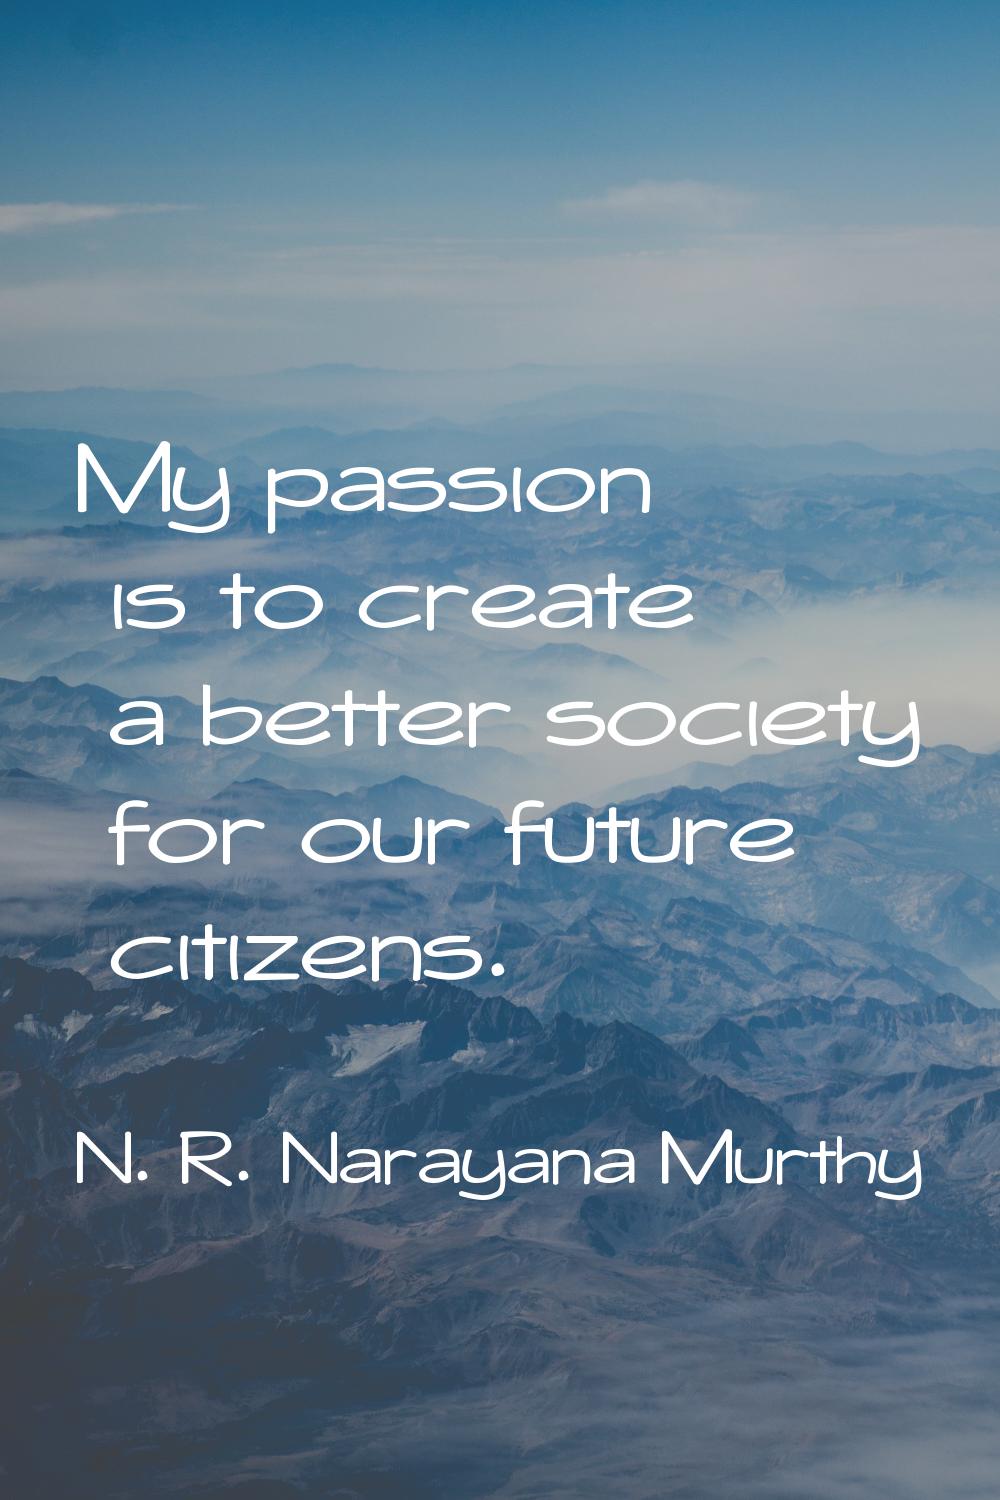 My passion is to create a better society for our future citizens.